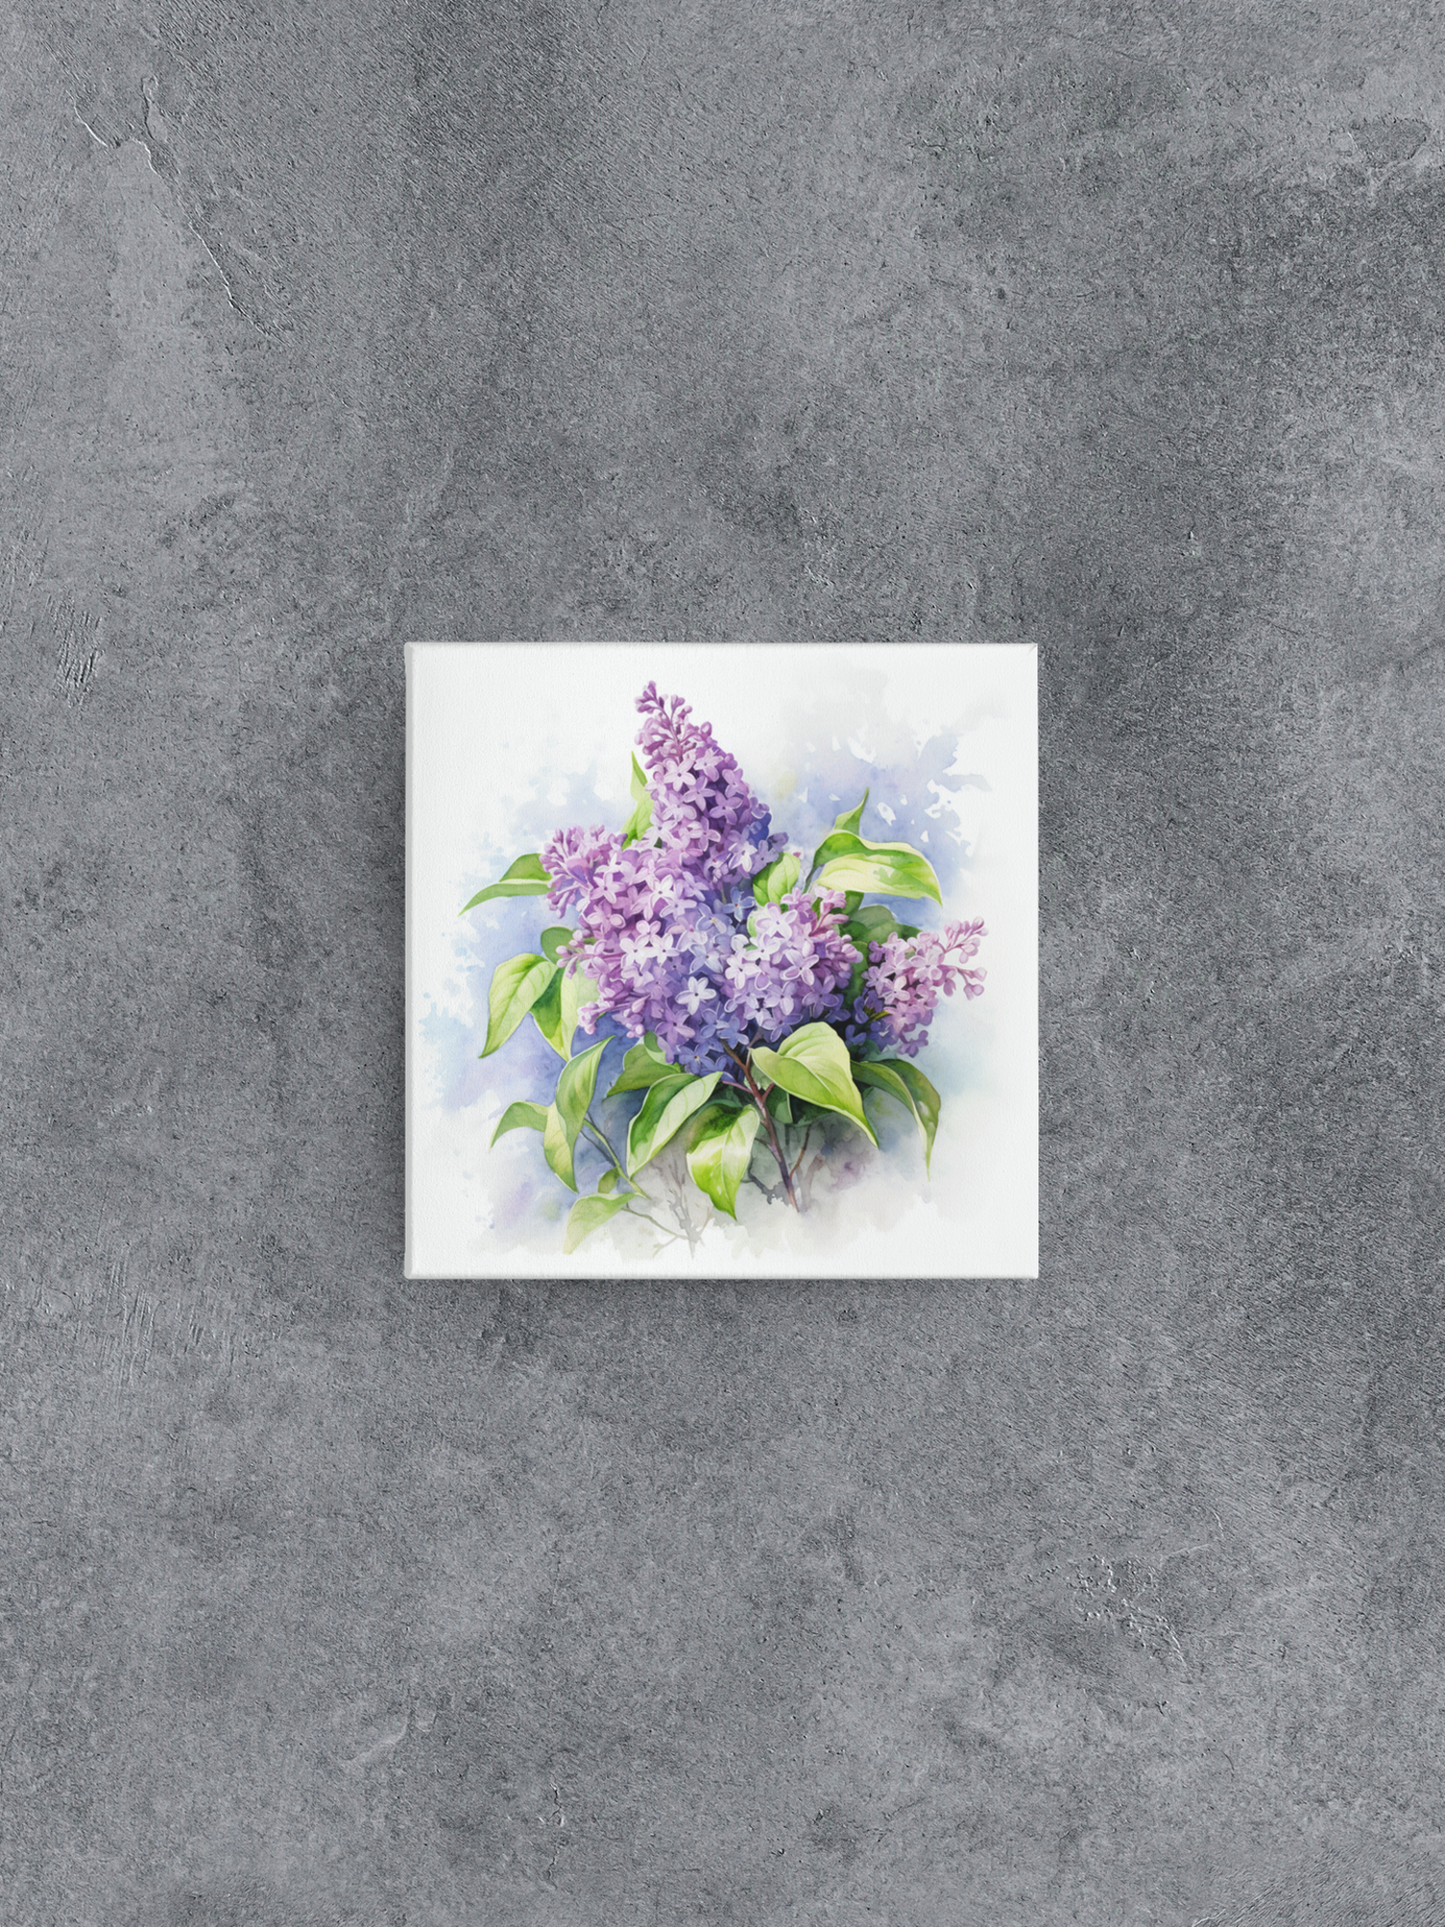 Watercolor Lilac Bush Canvas Wall Art, Flower Canvas Print, Nature Stretched Canvas Art, Purple Wall Decor, Mother's Day Gift